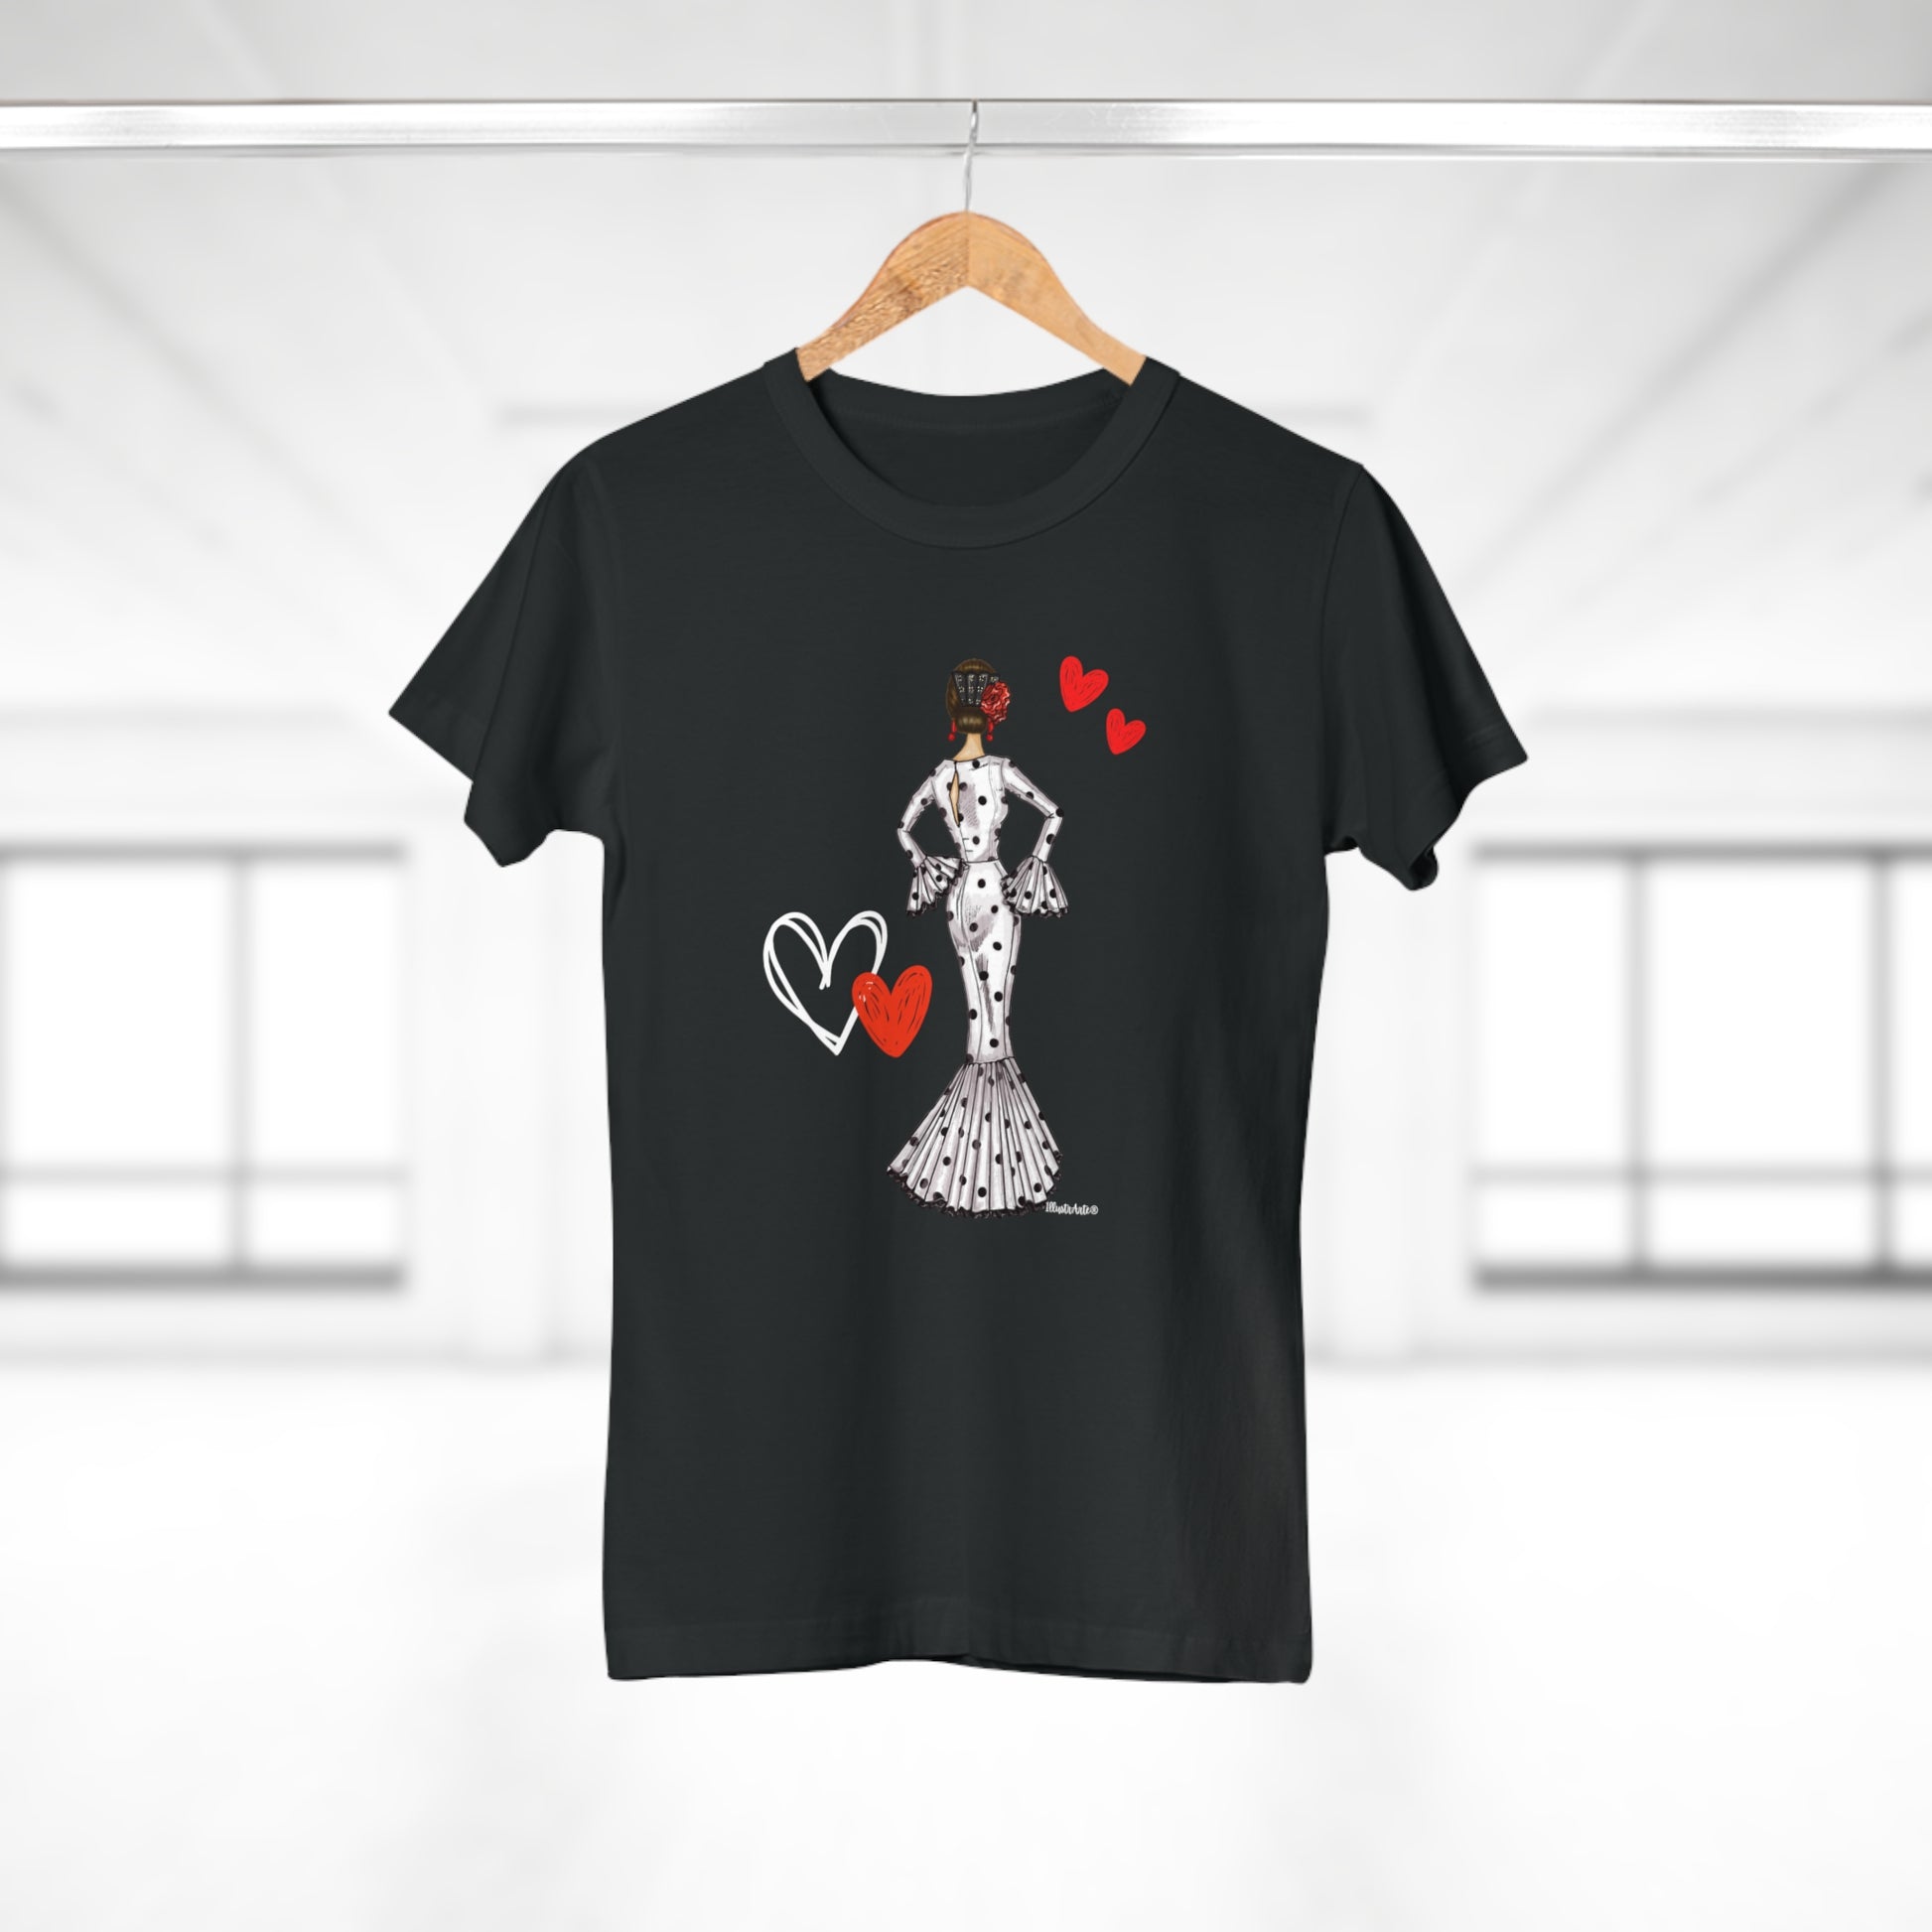 a black t - shirt with a woman holding a heart